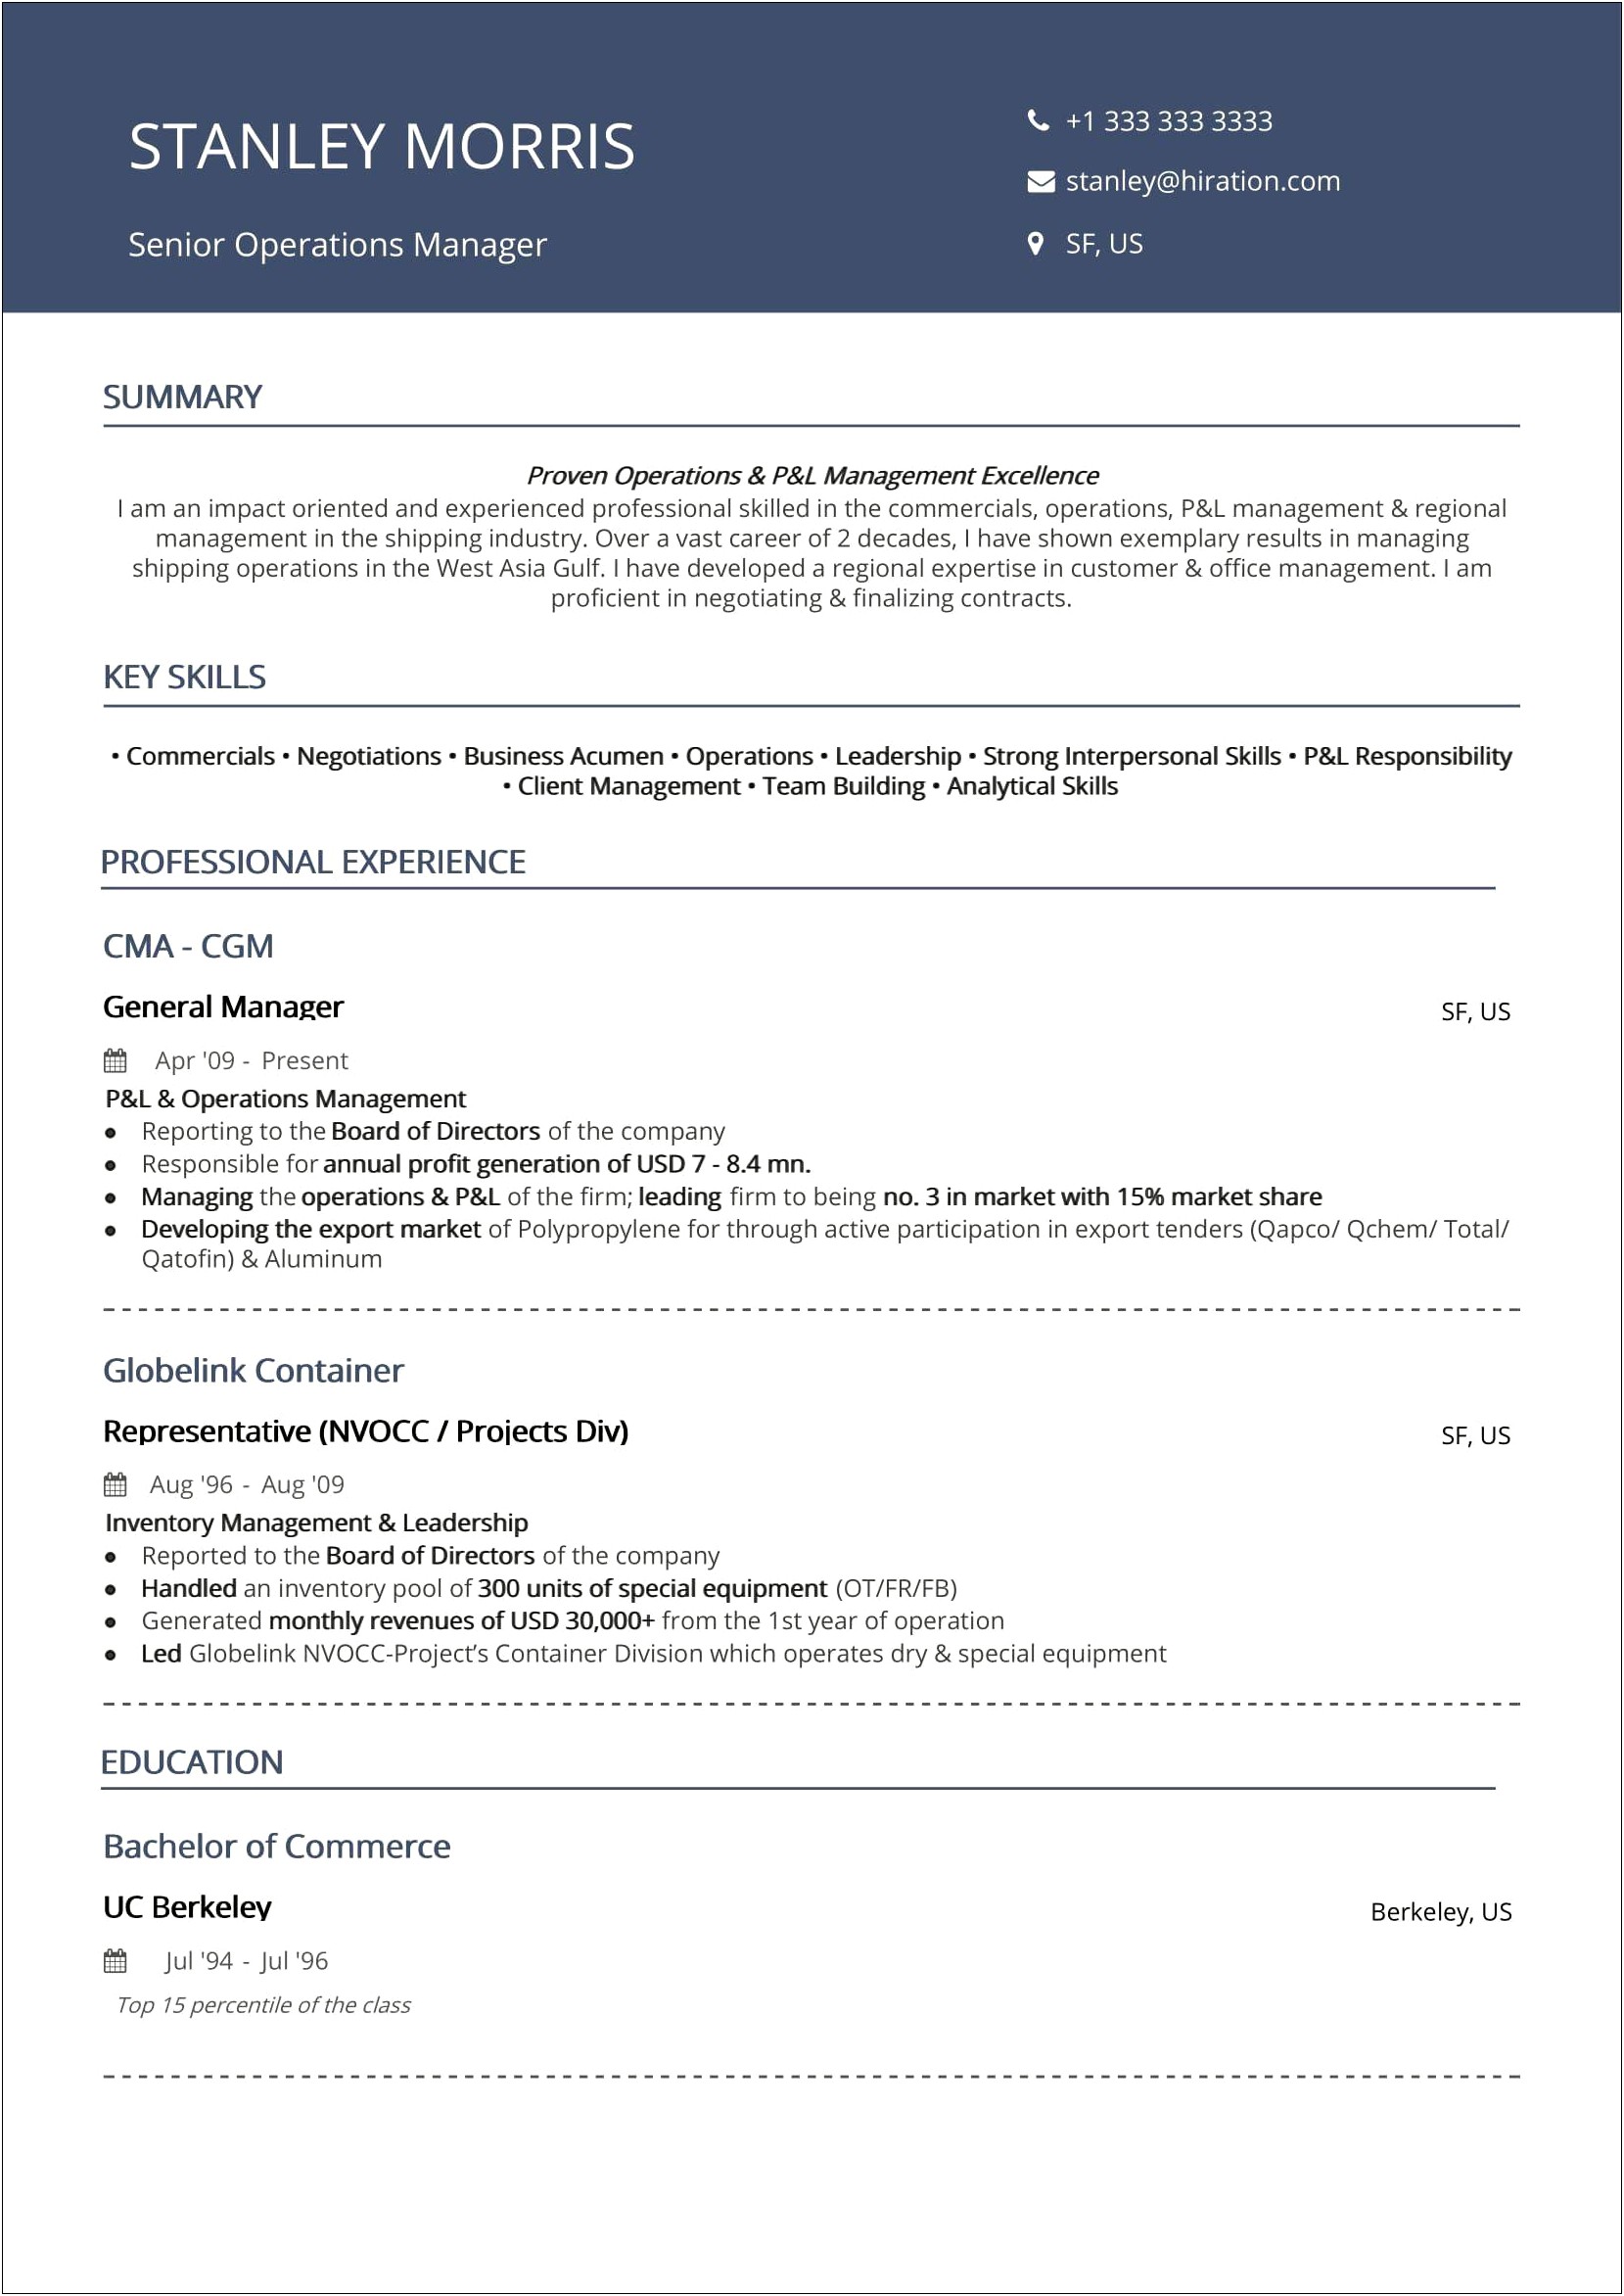 Great Resume Bullets Points For Operations Manager